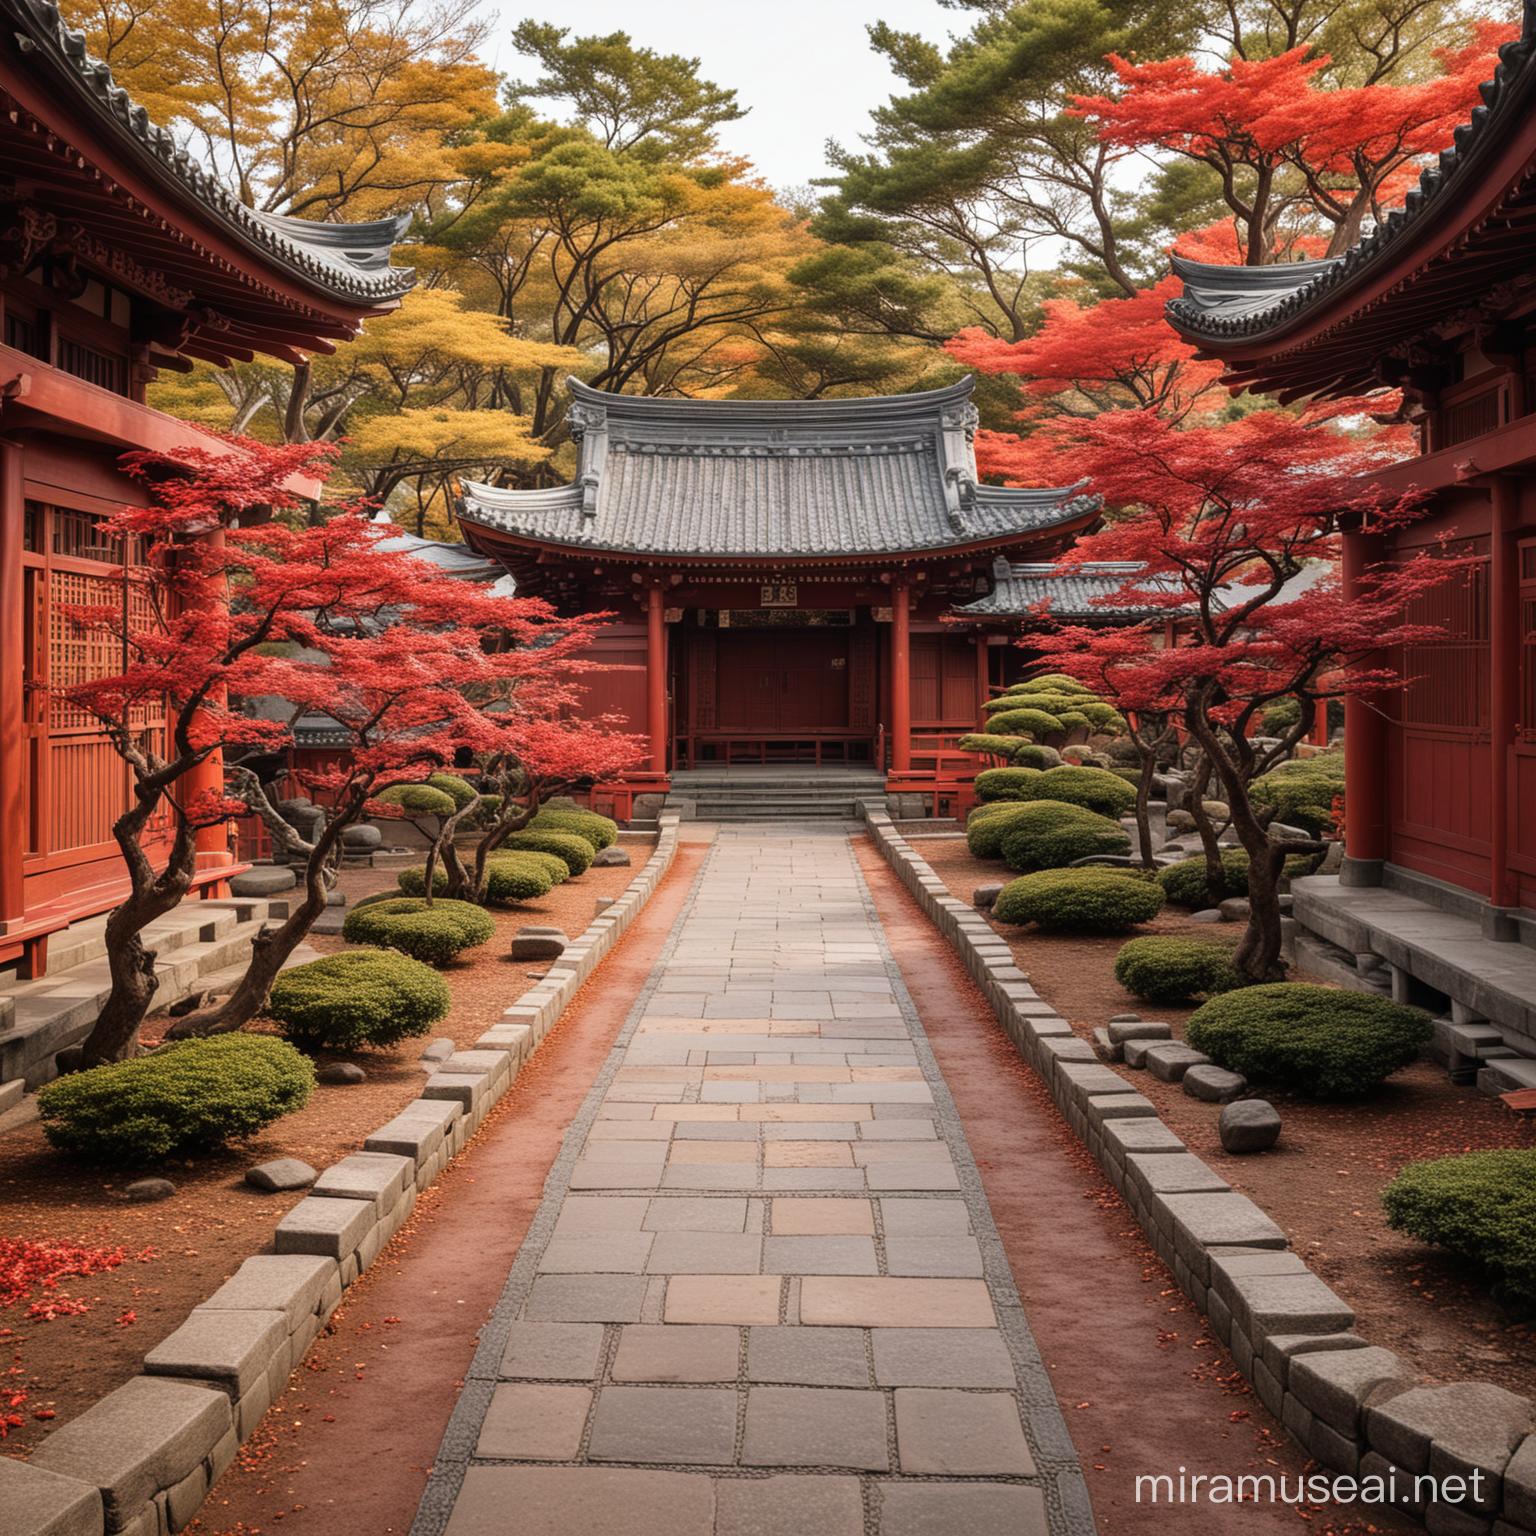 a red Japanese-style building with a path leading to it, flanked by many Japanese red dragons facing each other